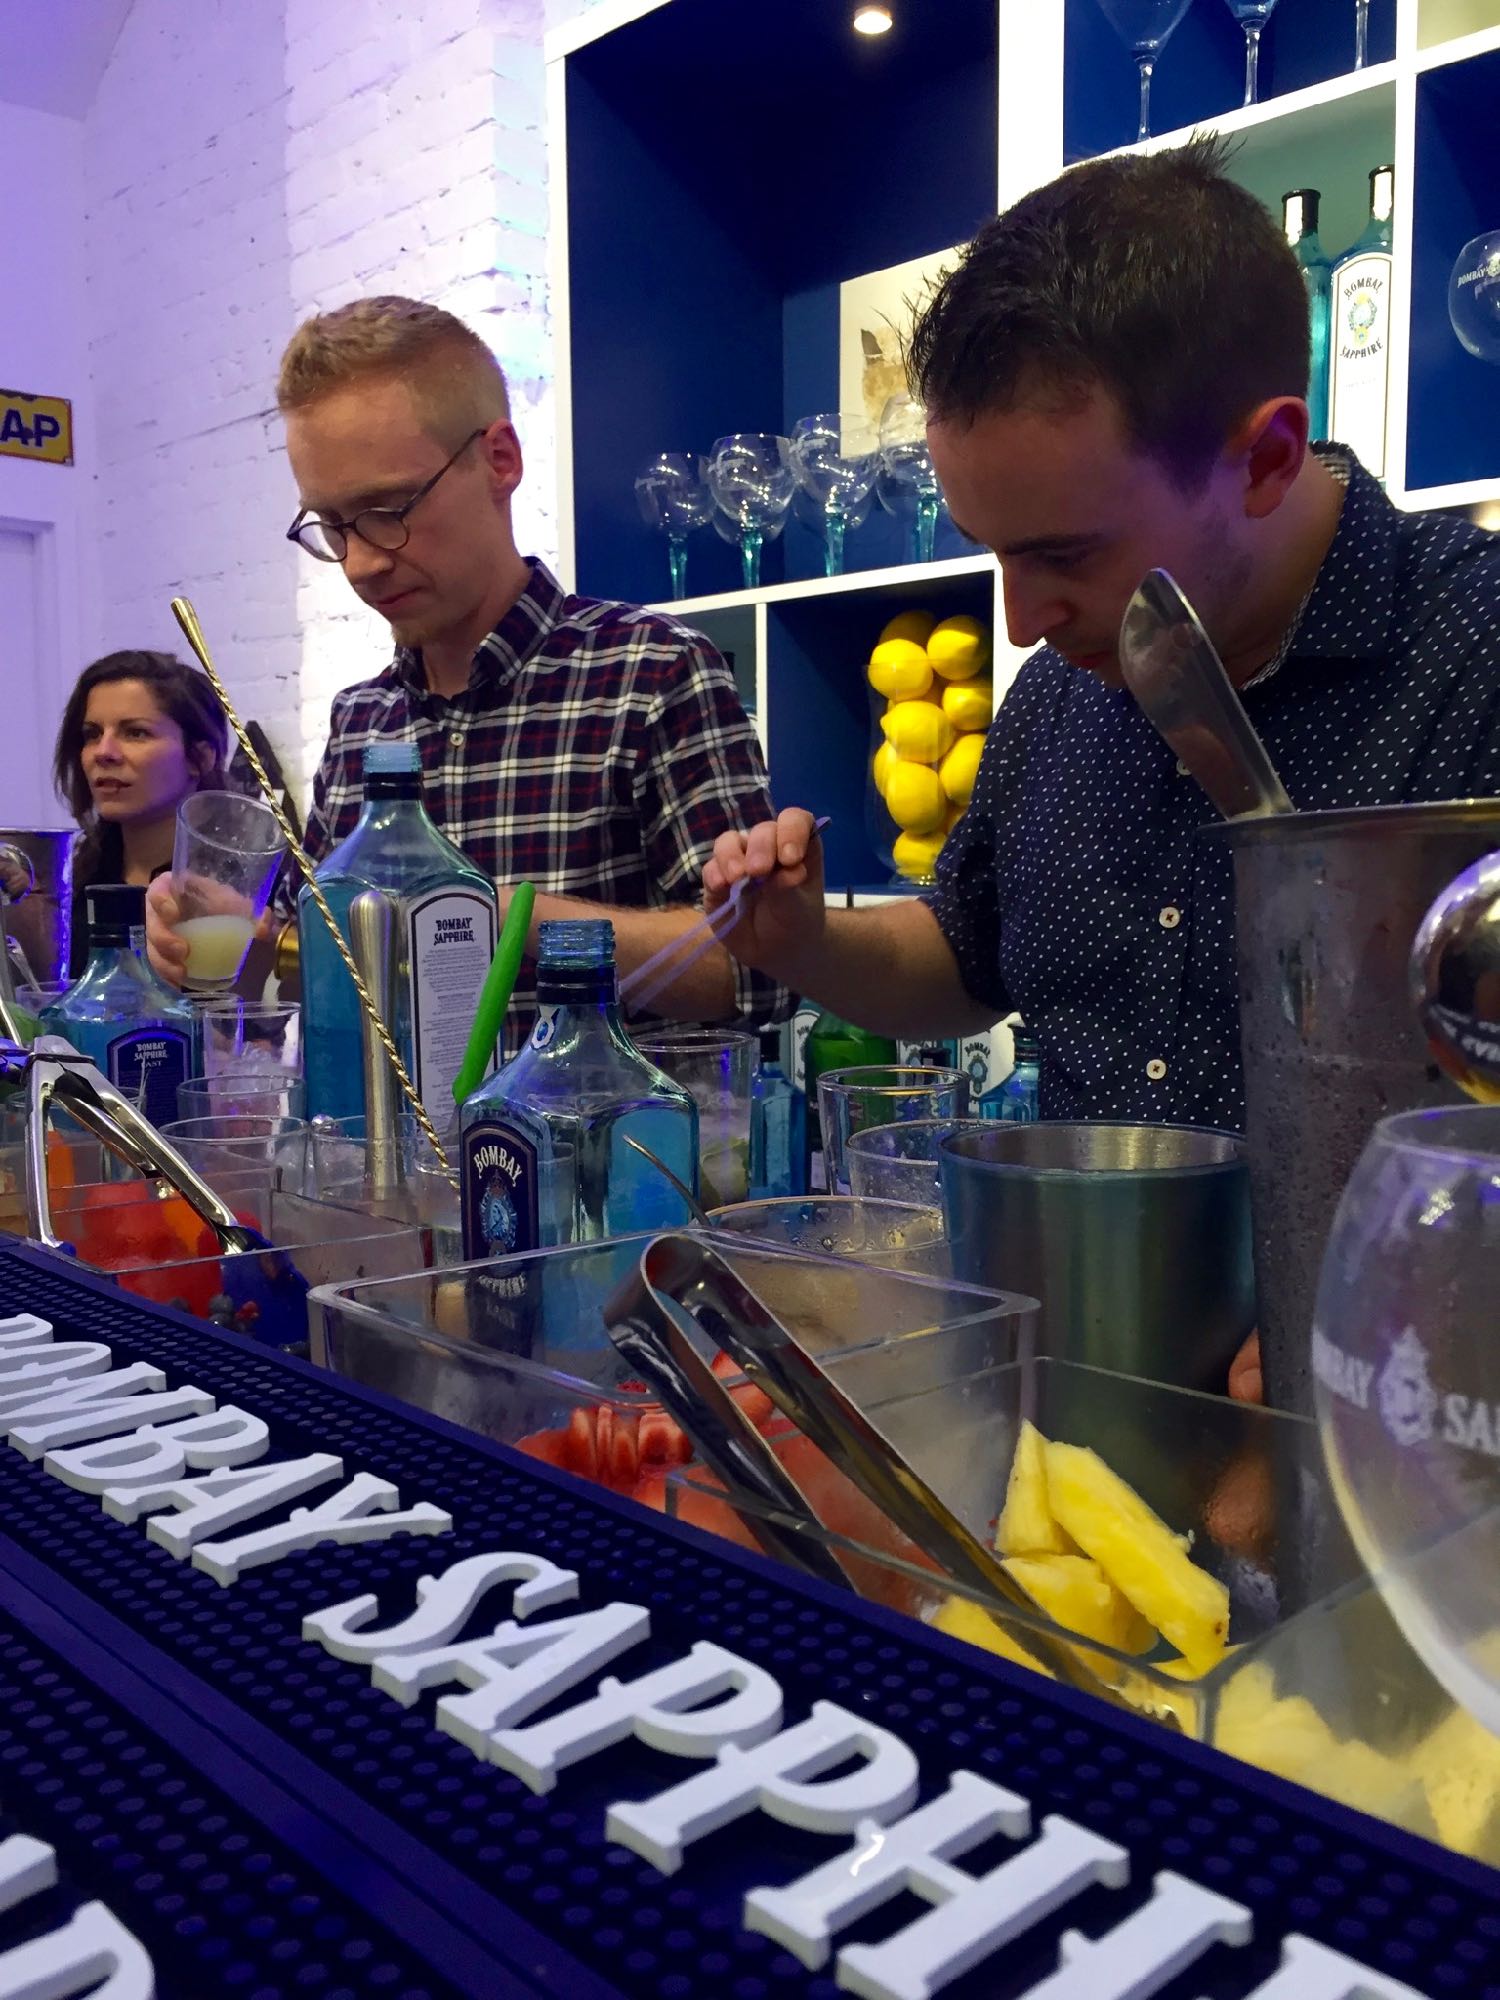 Mixologists Preparing Delicious Bombay Sapphire Gin Cocktails